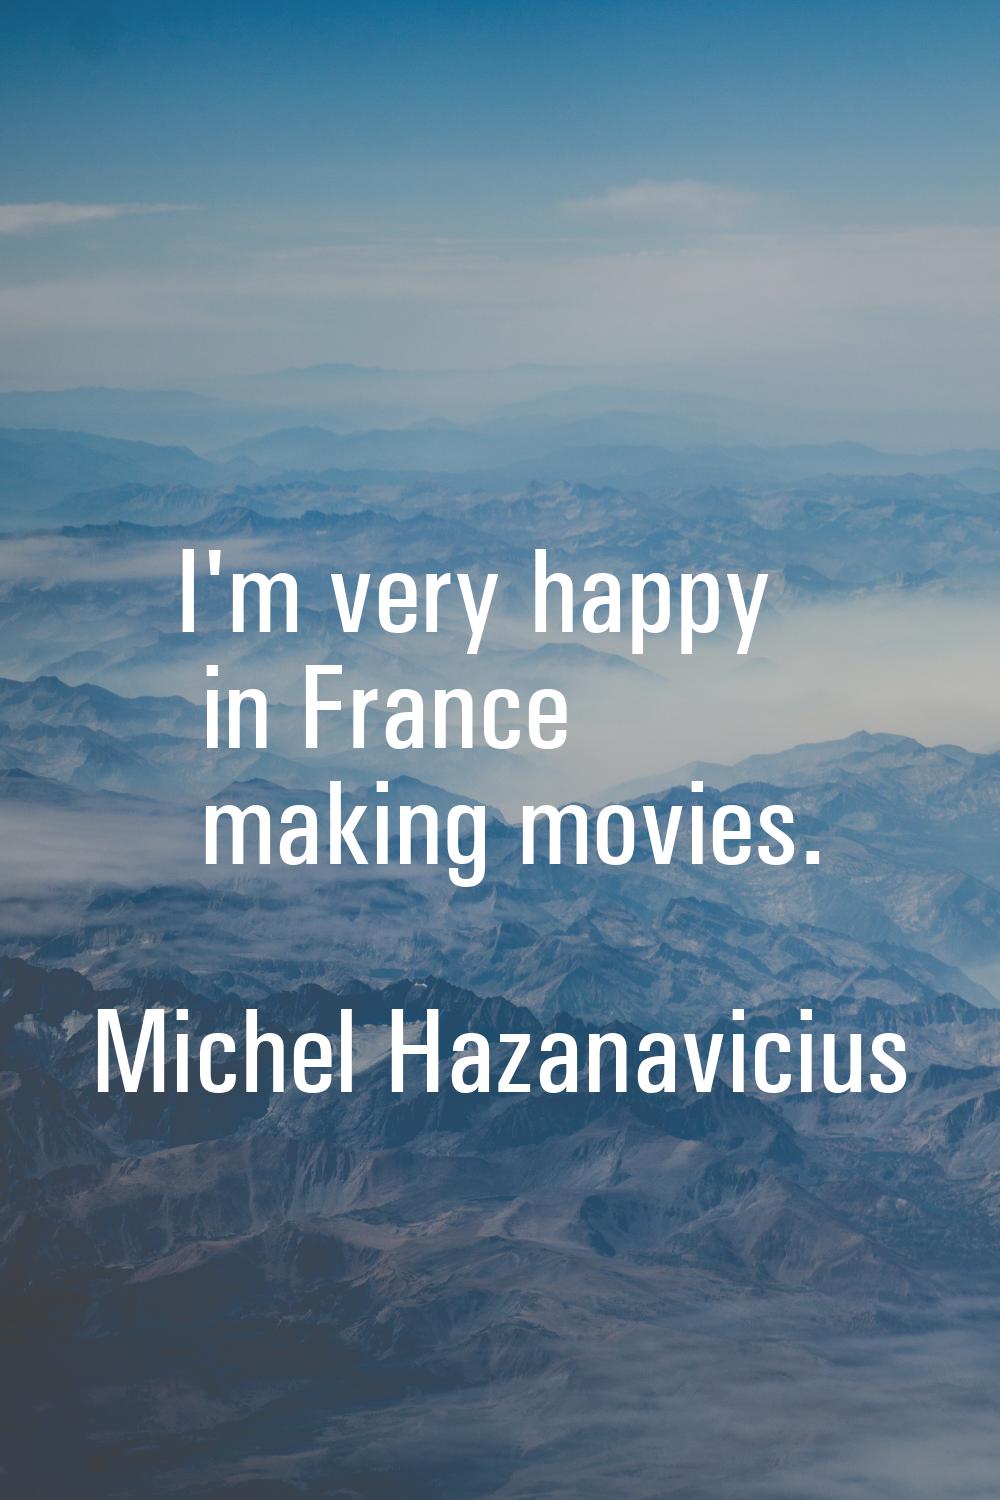 I'm very happy in France making movies.